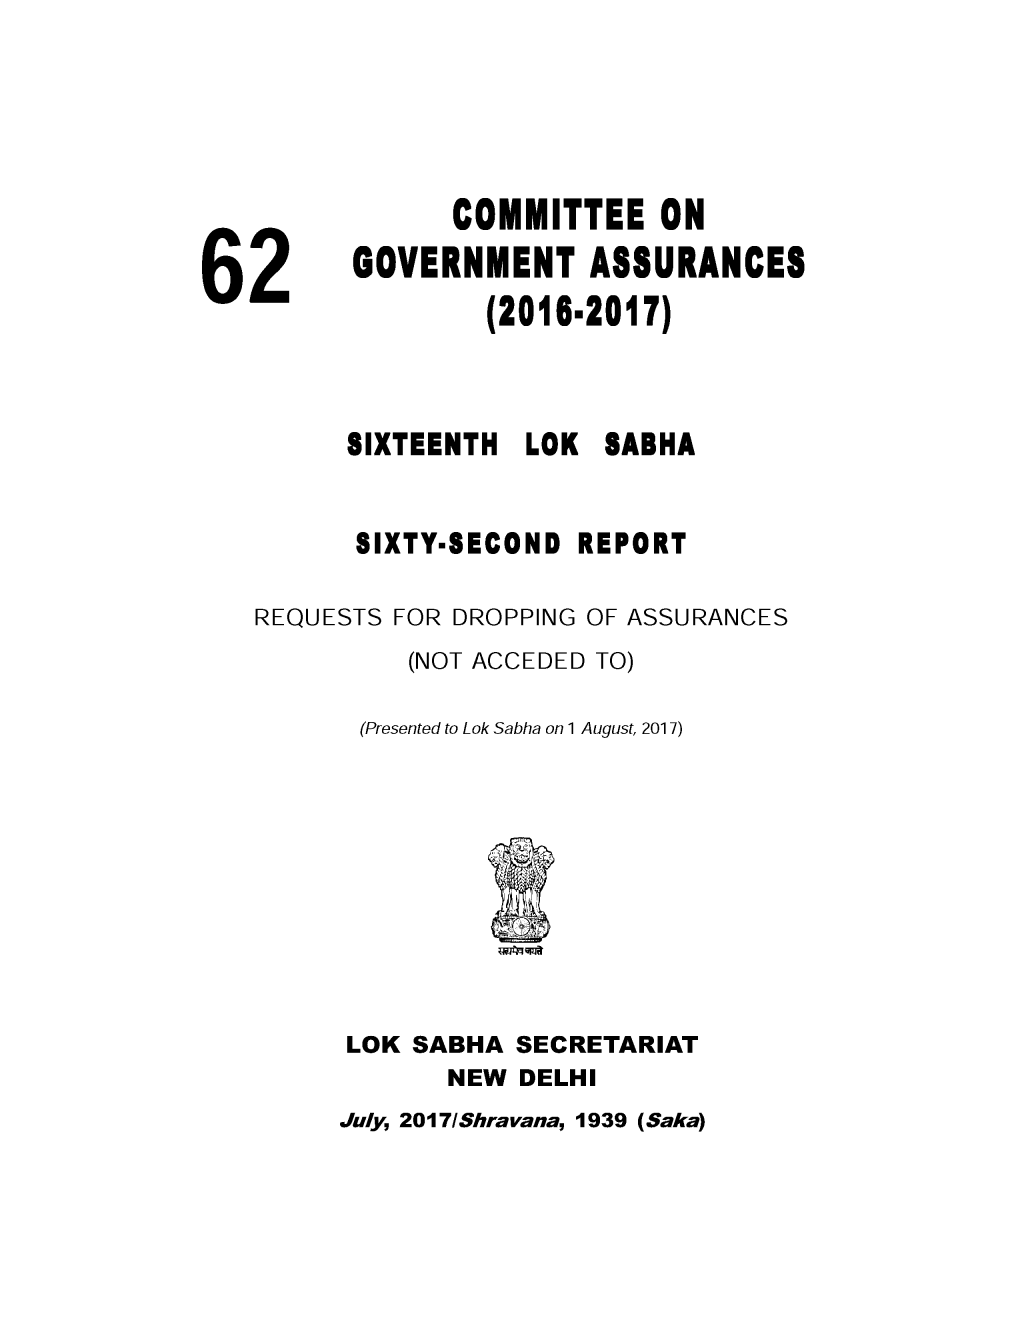 Committee on Government Assurances (2016-2017)